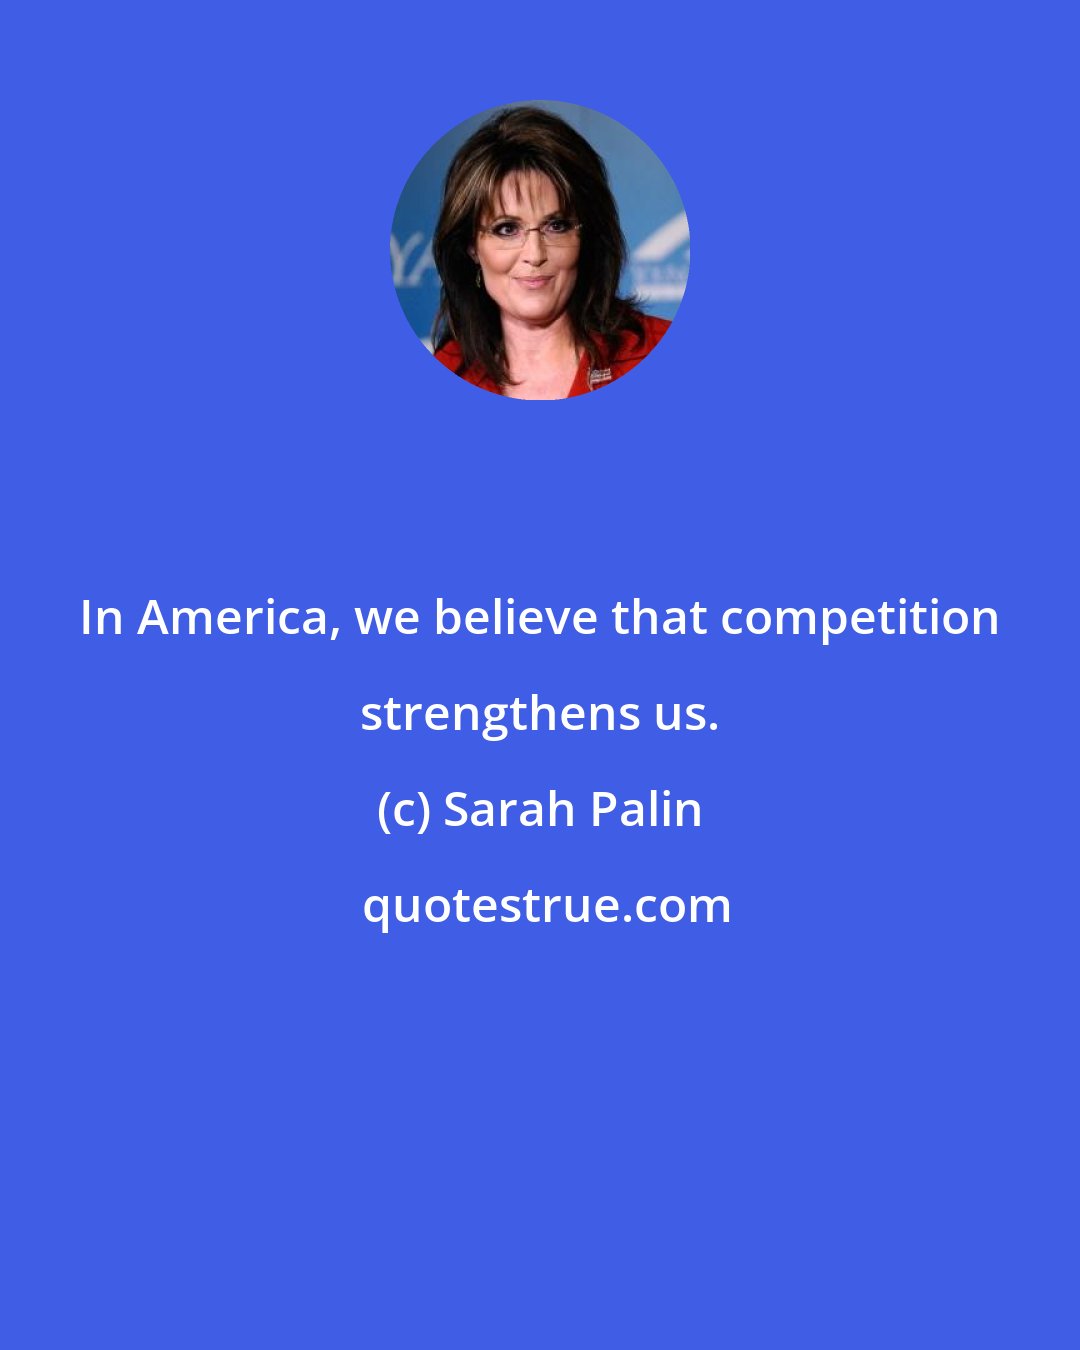 Sarah Palin: In America, we believe that competition strengthens us.